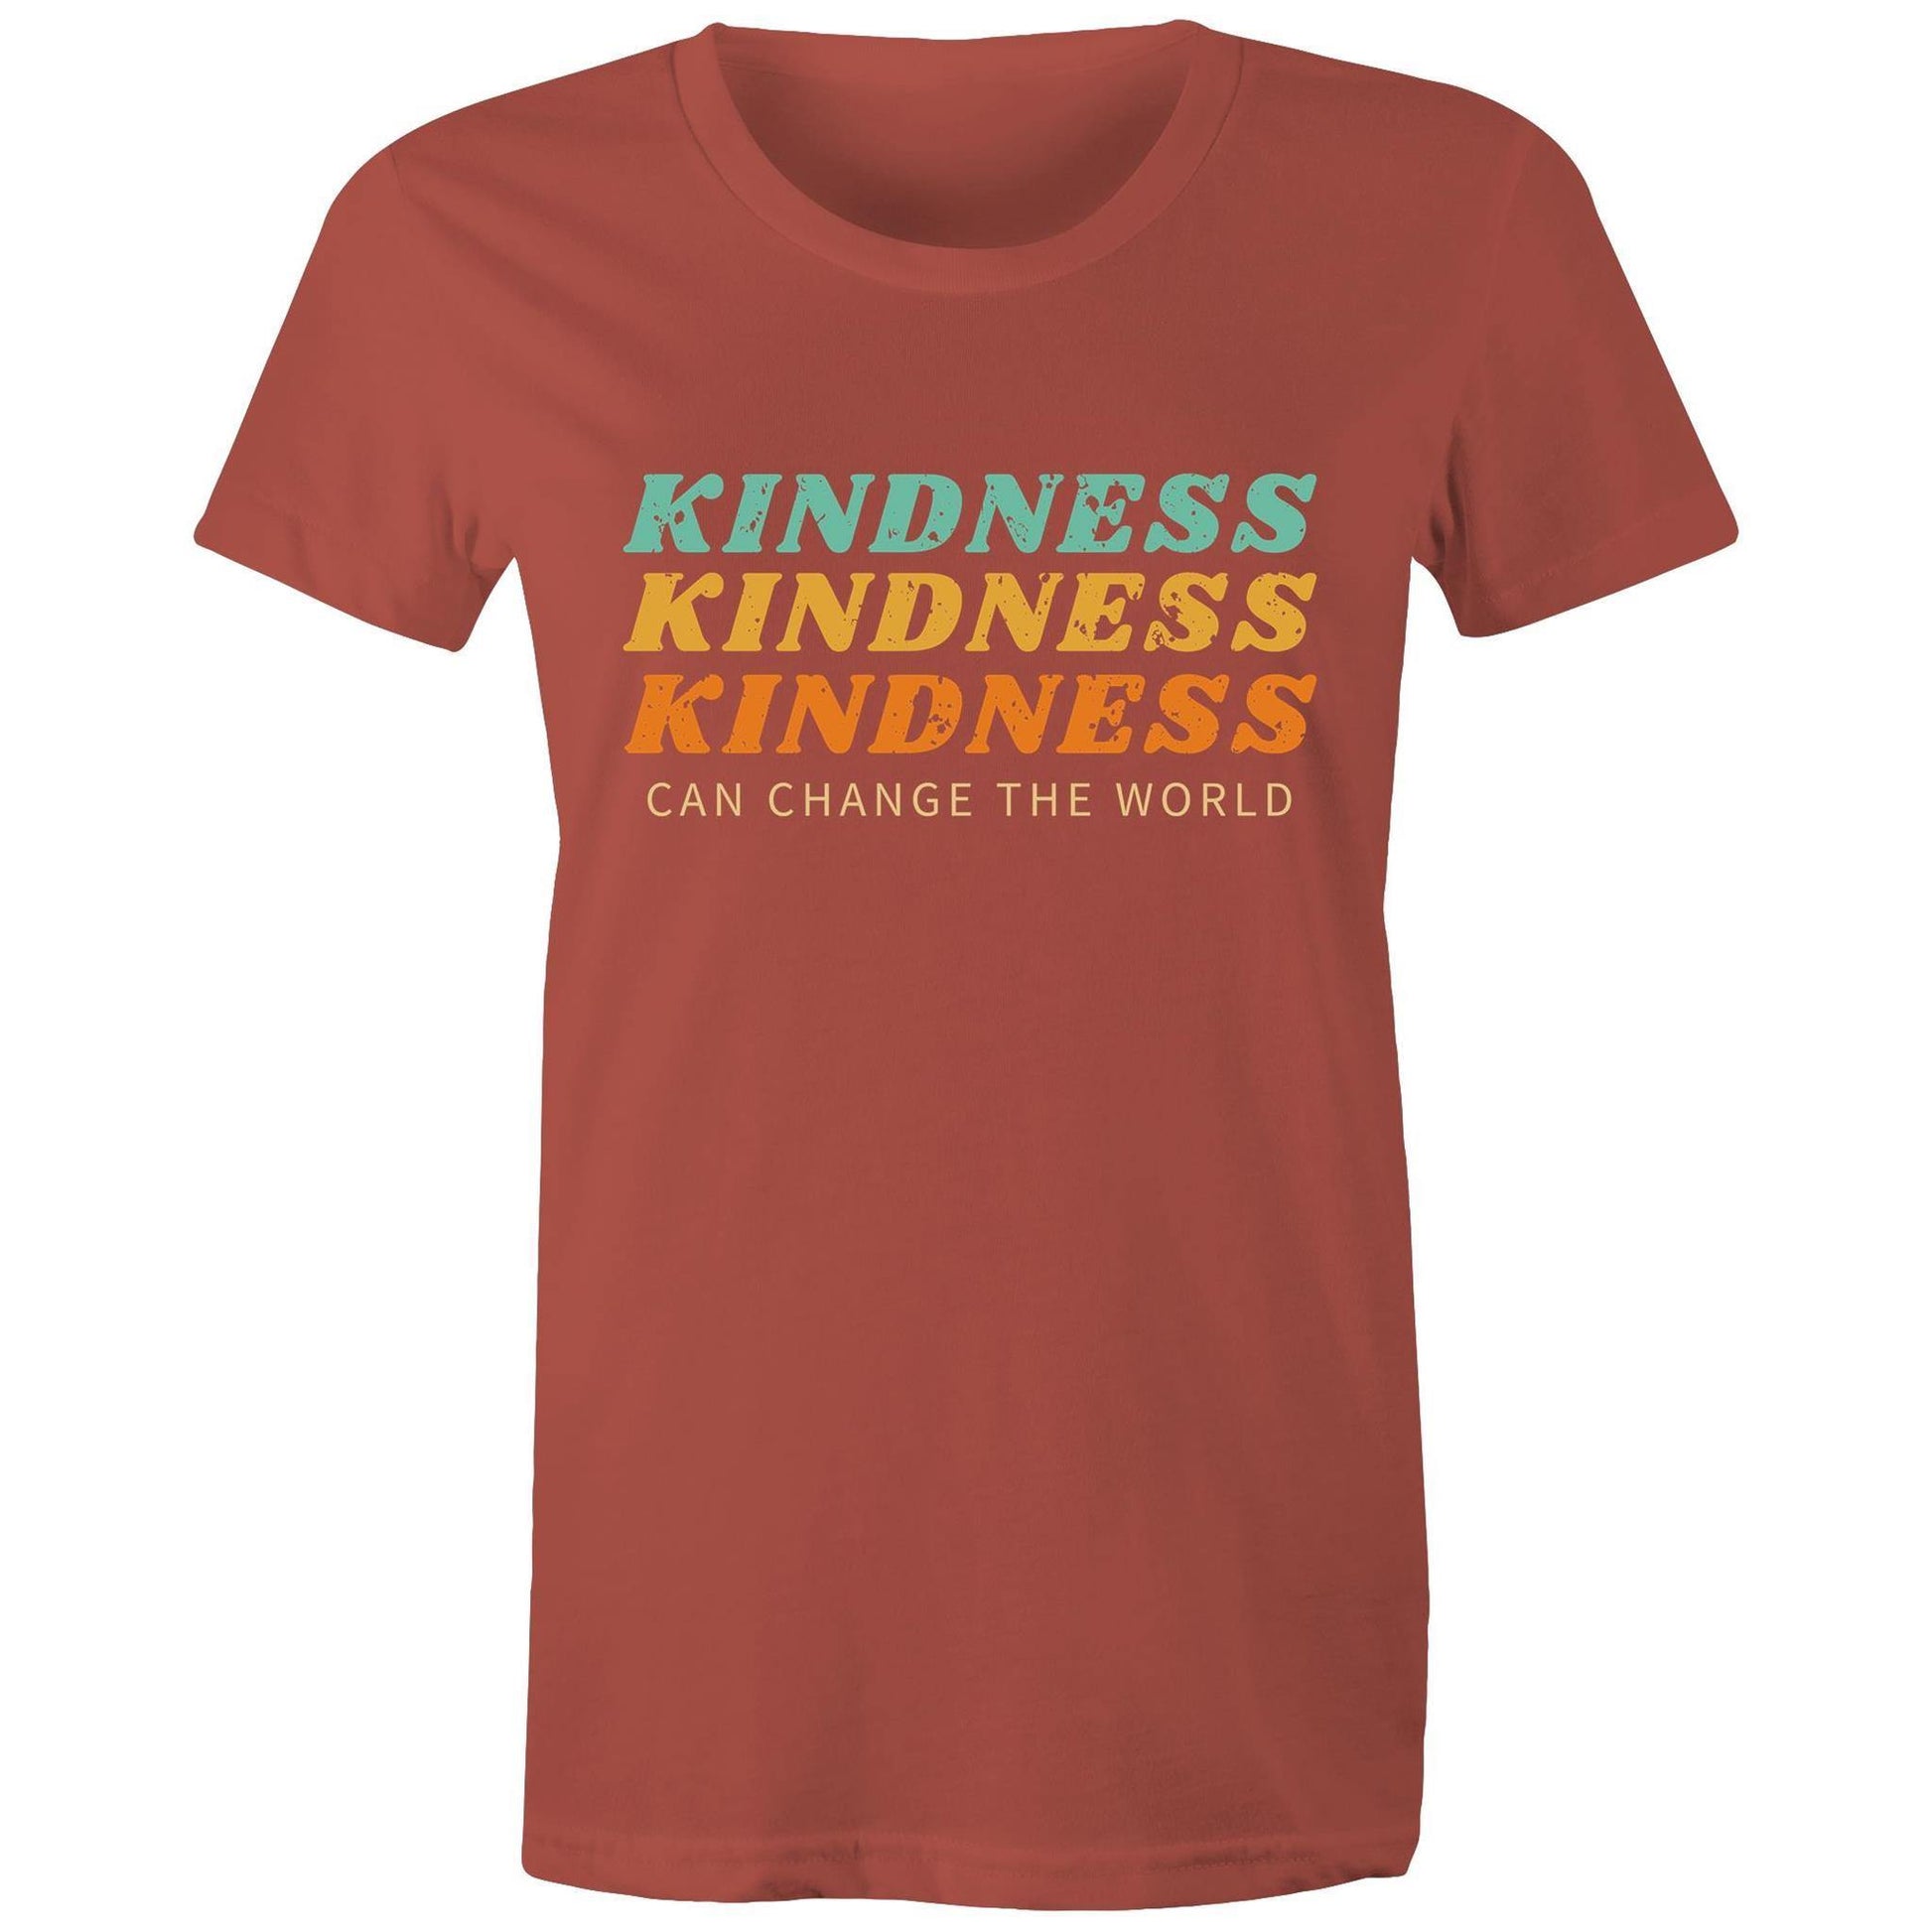 Kindness Can Change The World - Women's T-shirt Coral Womens T-shirt Retro Womens